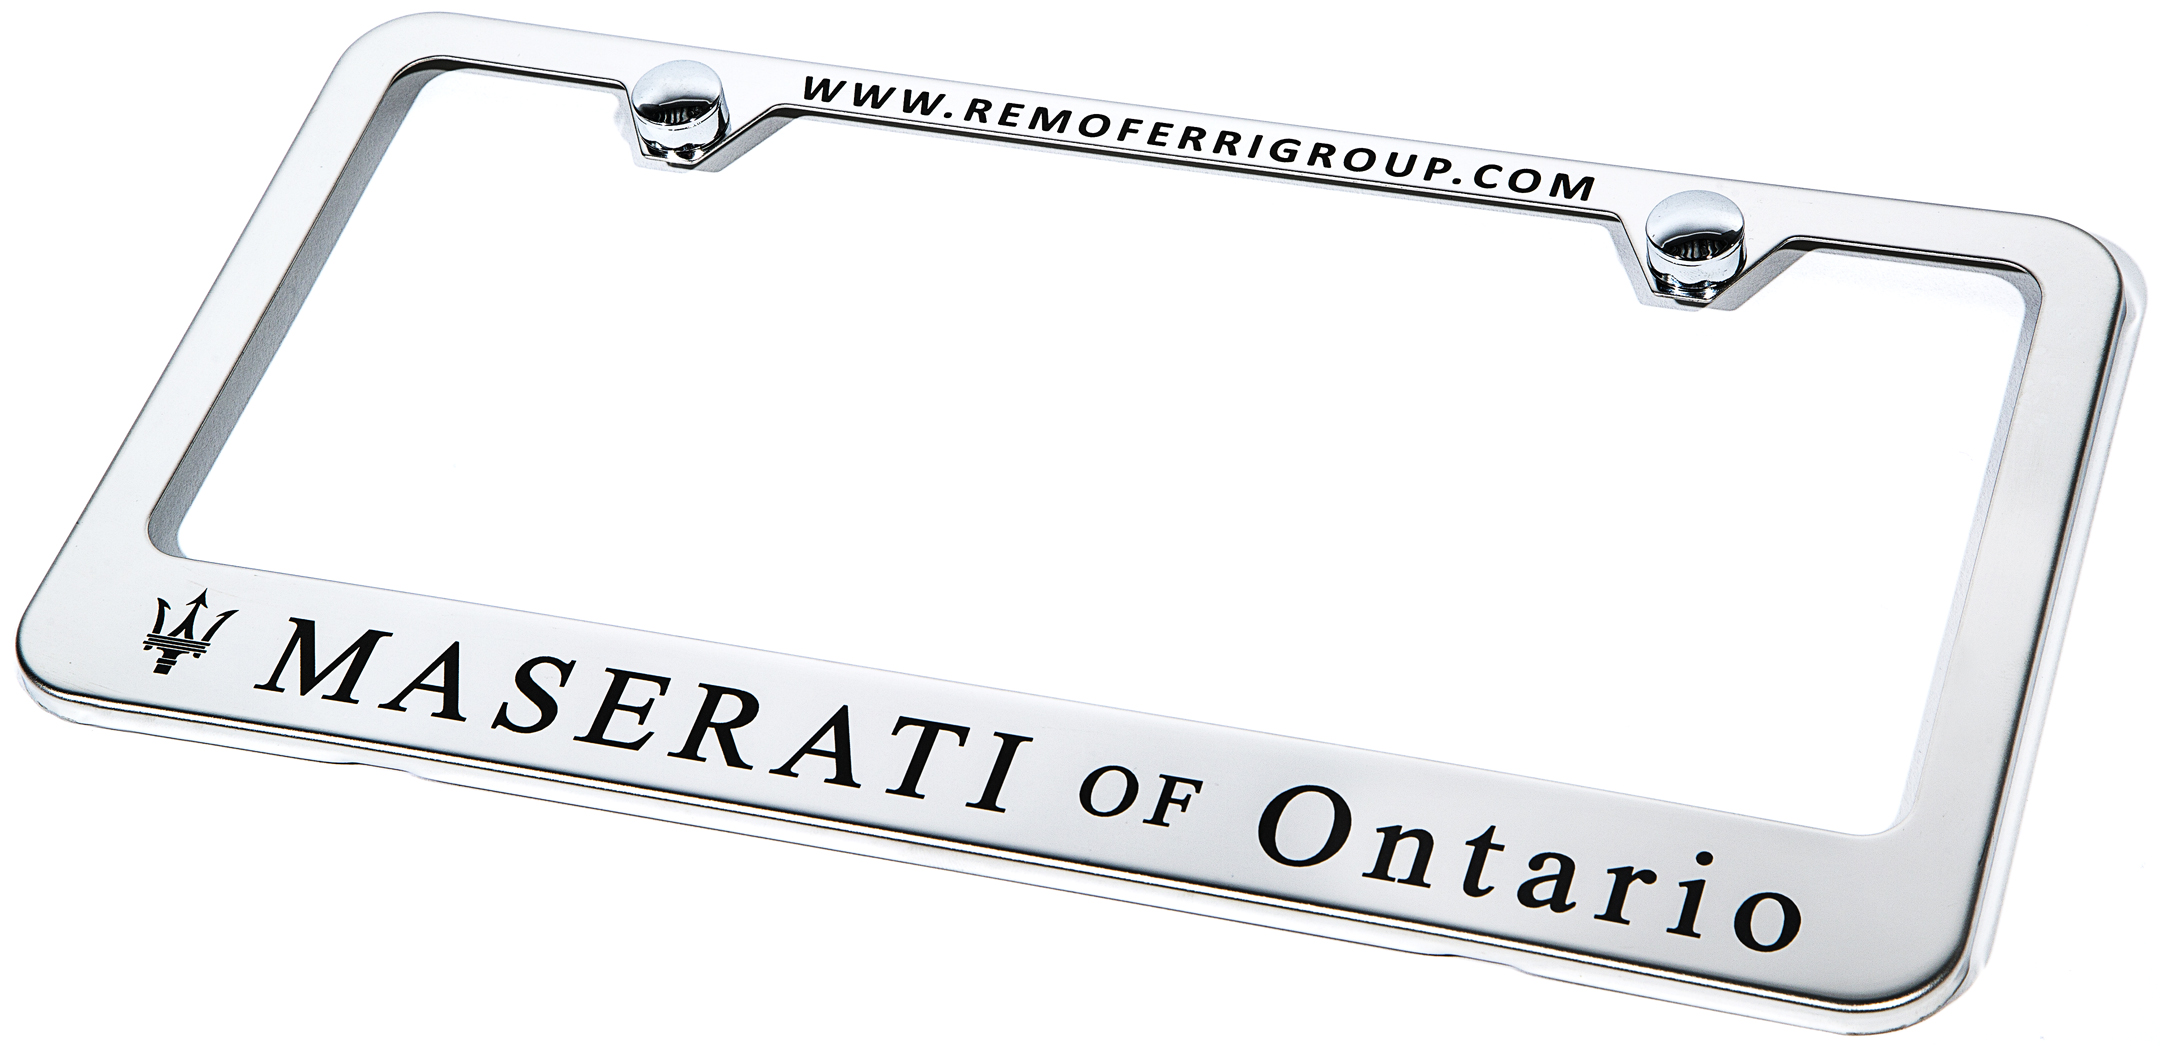 CHROME FRAME CUSTOM PLASTIC PERSONALIZED License Plate Frame COLOR FONT CHOICE